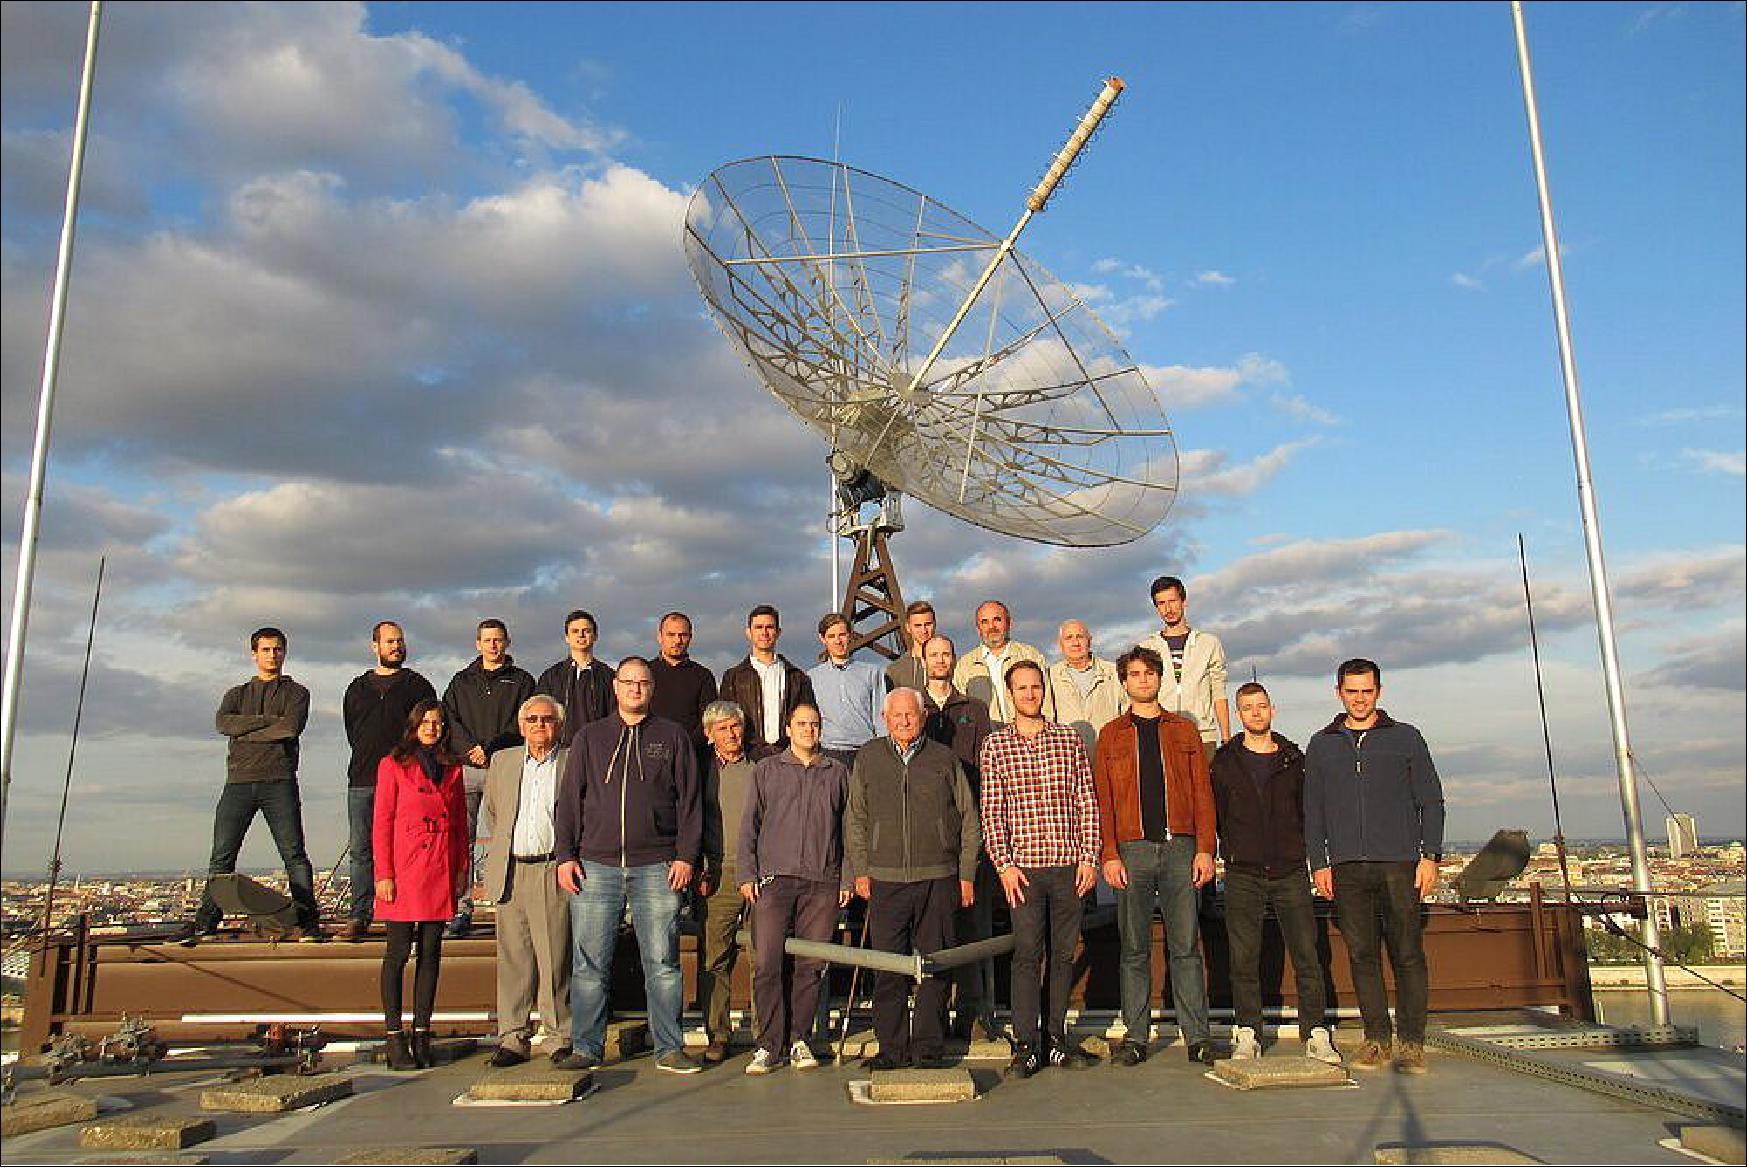 Figure 2: The SMOG team formed of Lecturers and Students from BME University, Hungery (image credit: BME, Alba Orbital)